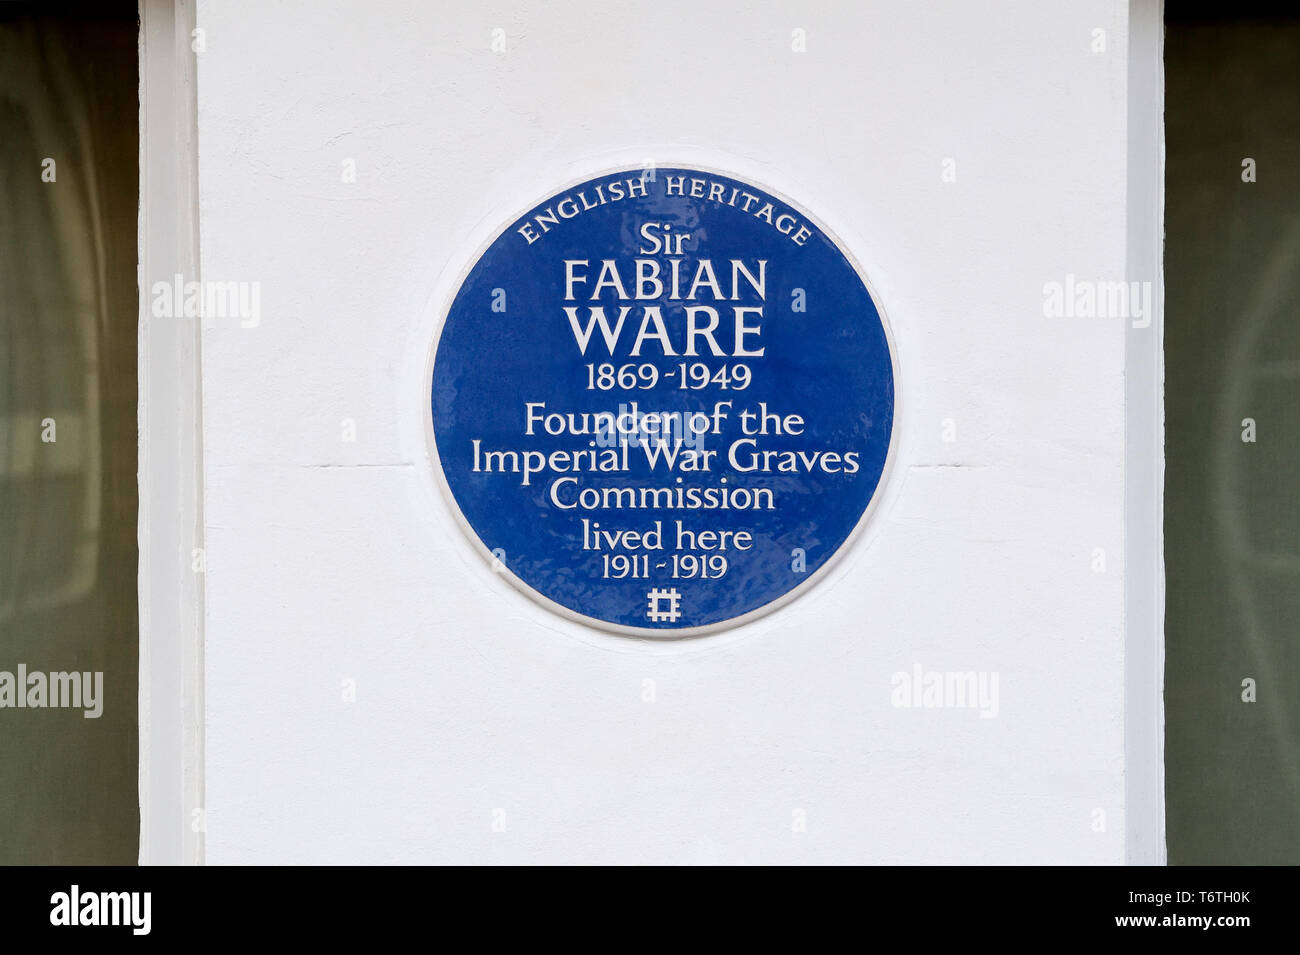 London, England, UK. Commemorative Blue Plaque: Sir Fabian Ware (1869-1949) Founder of the Imperial War Graves Commission lived here 1911-1919. 14 W... Stock Photo